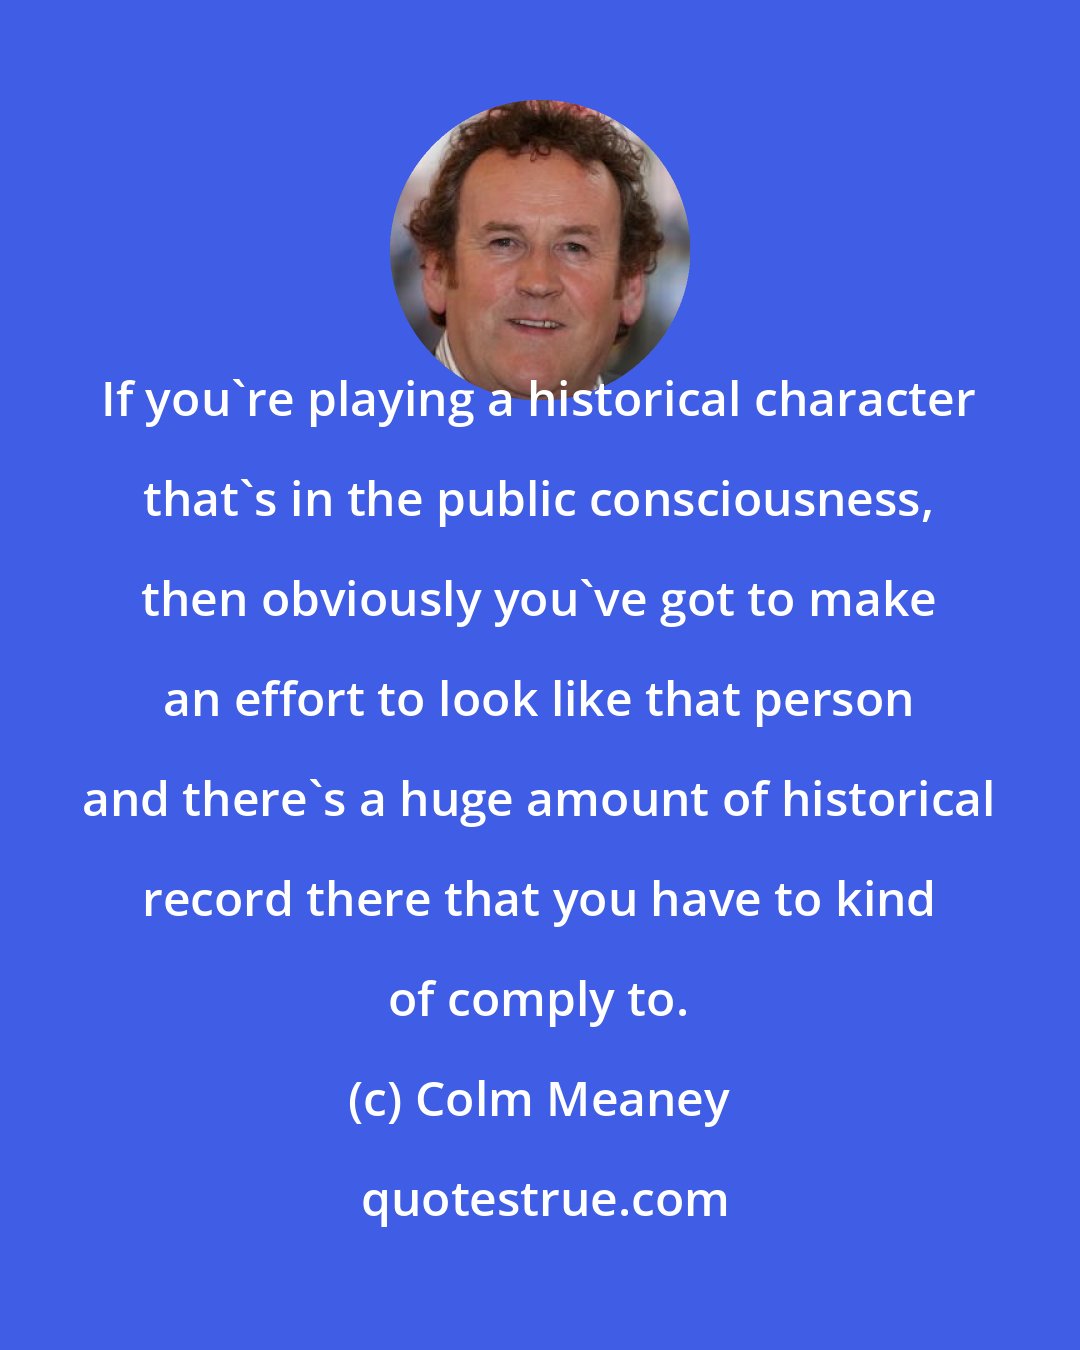 Colm Meaney: If you're playing a historical character that's in the public consciousness, then obviously you've got to make an effort to look like that person and there's a huge amount of historical record there that you have to kind of comply to.